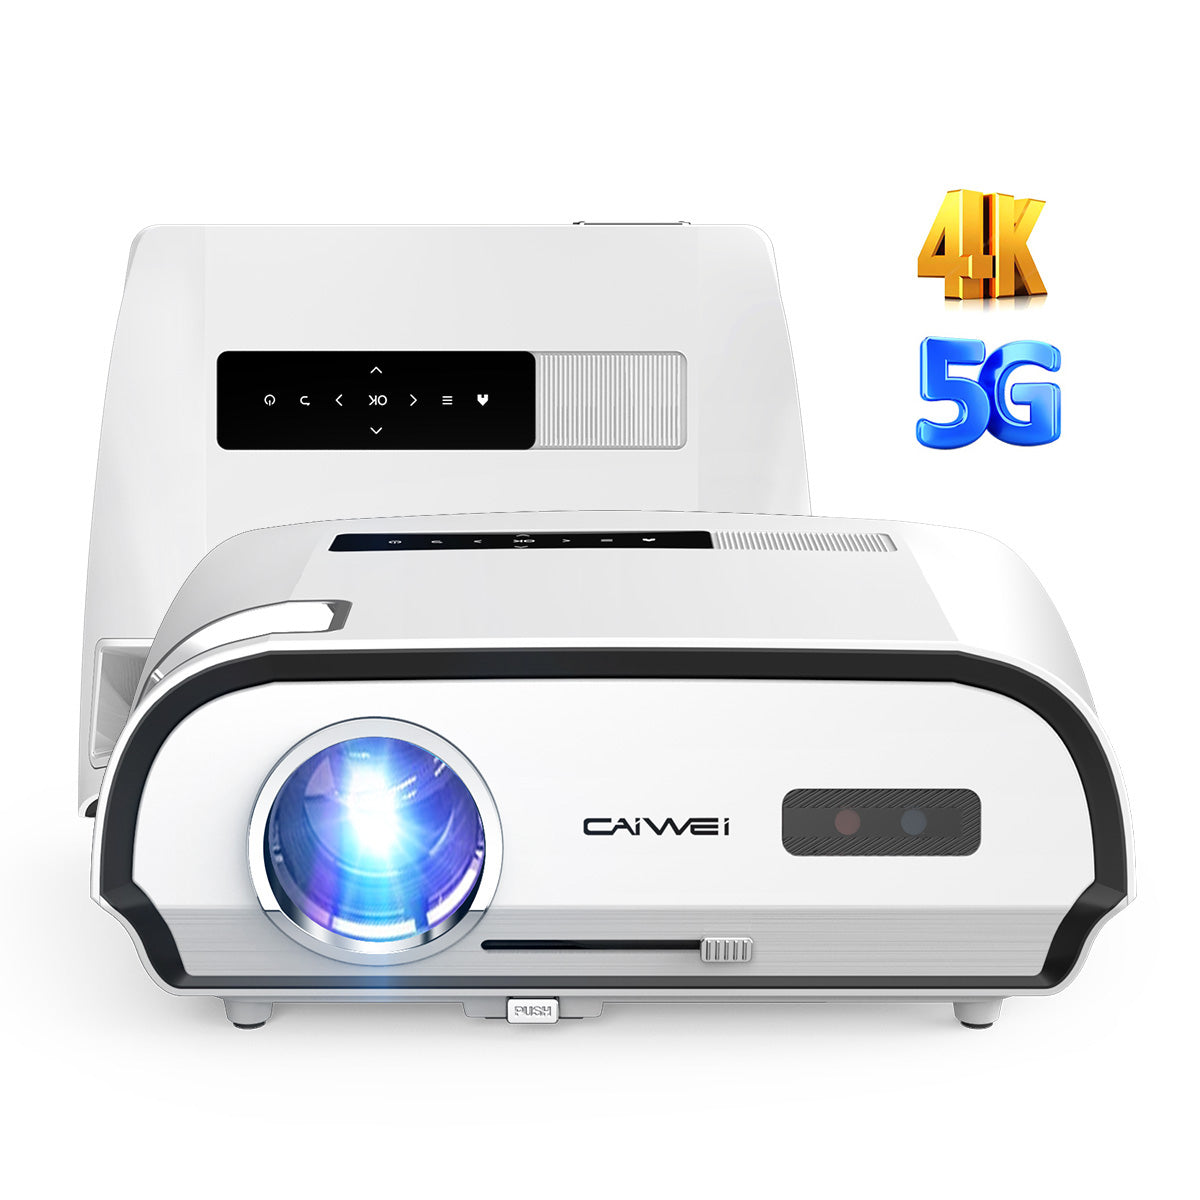 CAIWEI High Lumen 4K Projectors Daylight 1100 ANSI/14300LM, 5G WiFi Bluetooth Smart LCD Android TV Projector with Apps Netflix Prime Video Airplay, Zoom, HDMI ARC, USB, RJ45 for Home Theater Outdoor Office